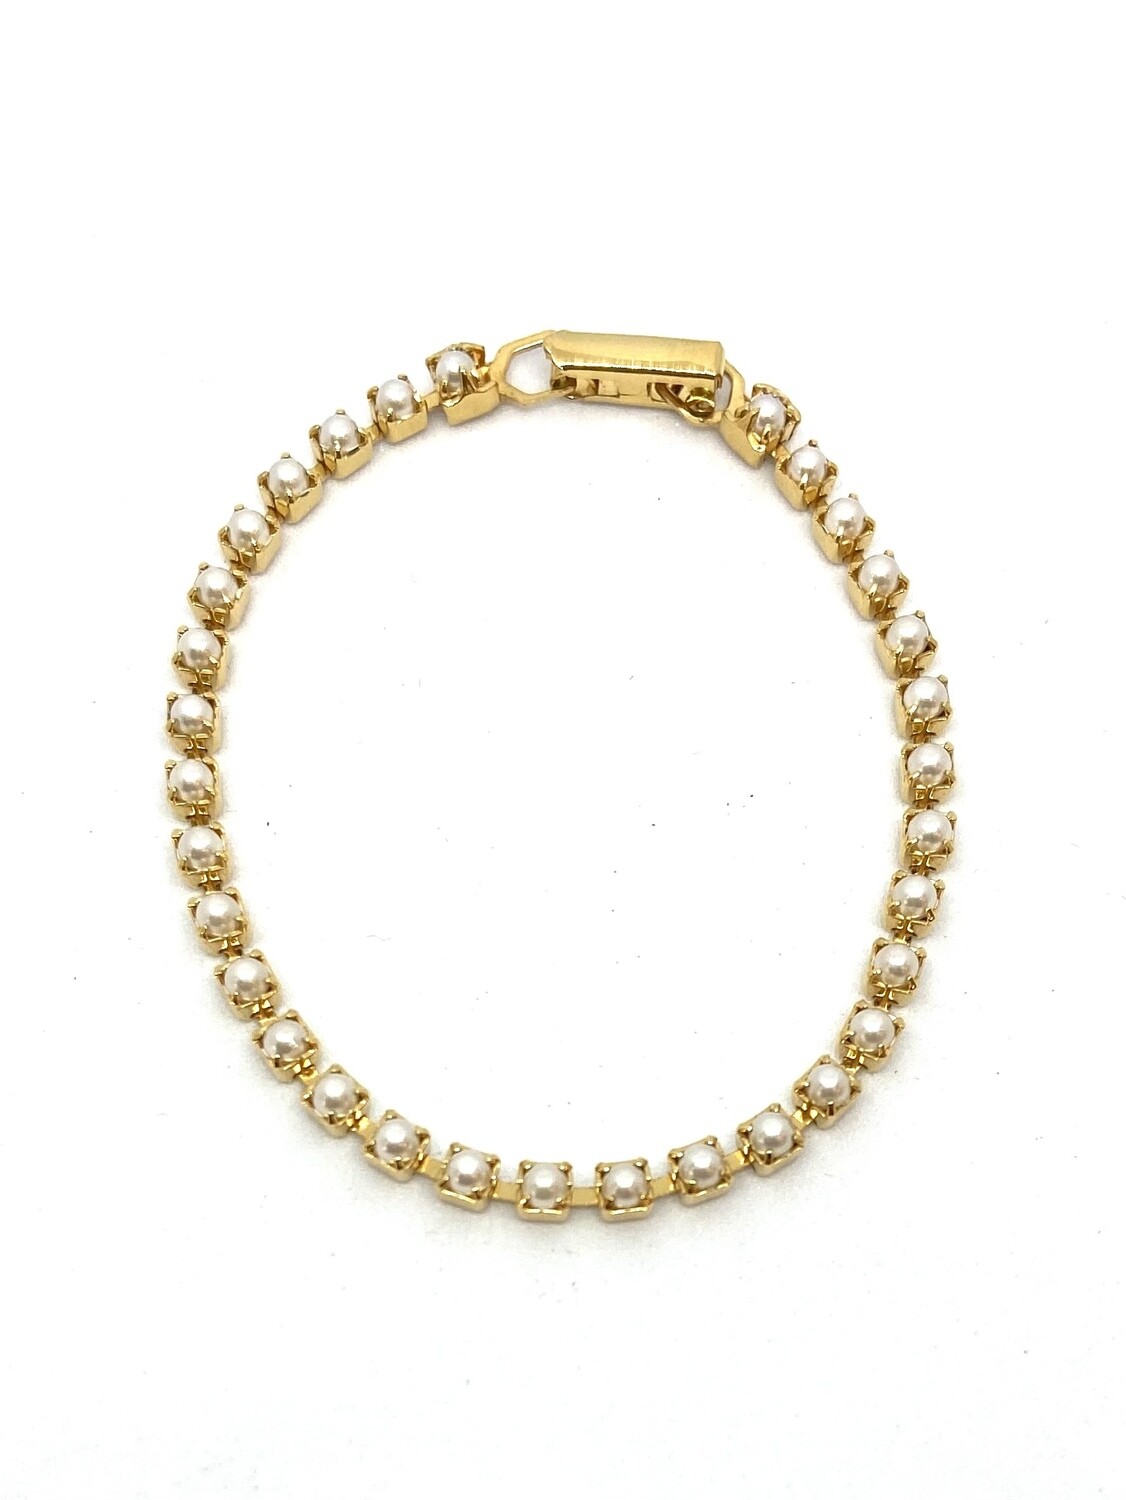 Antique Pearl and Gold Bracelet 7”